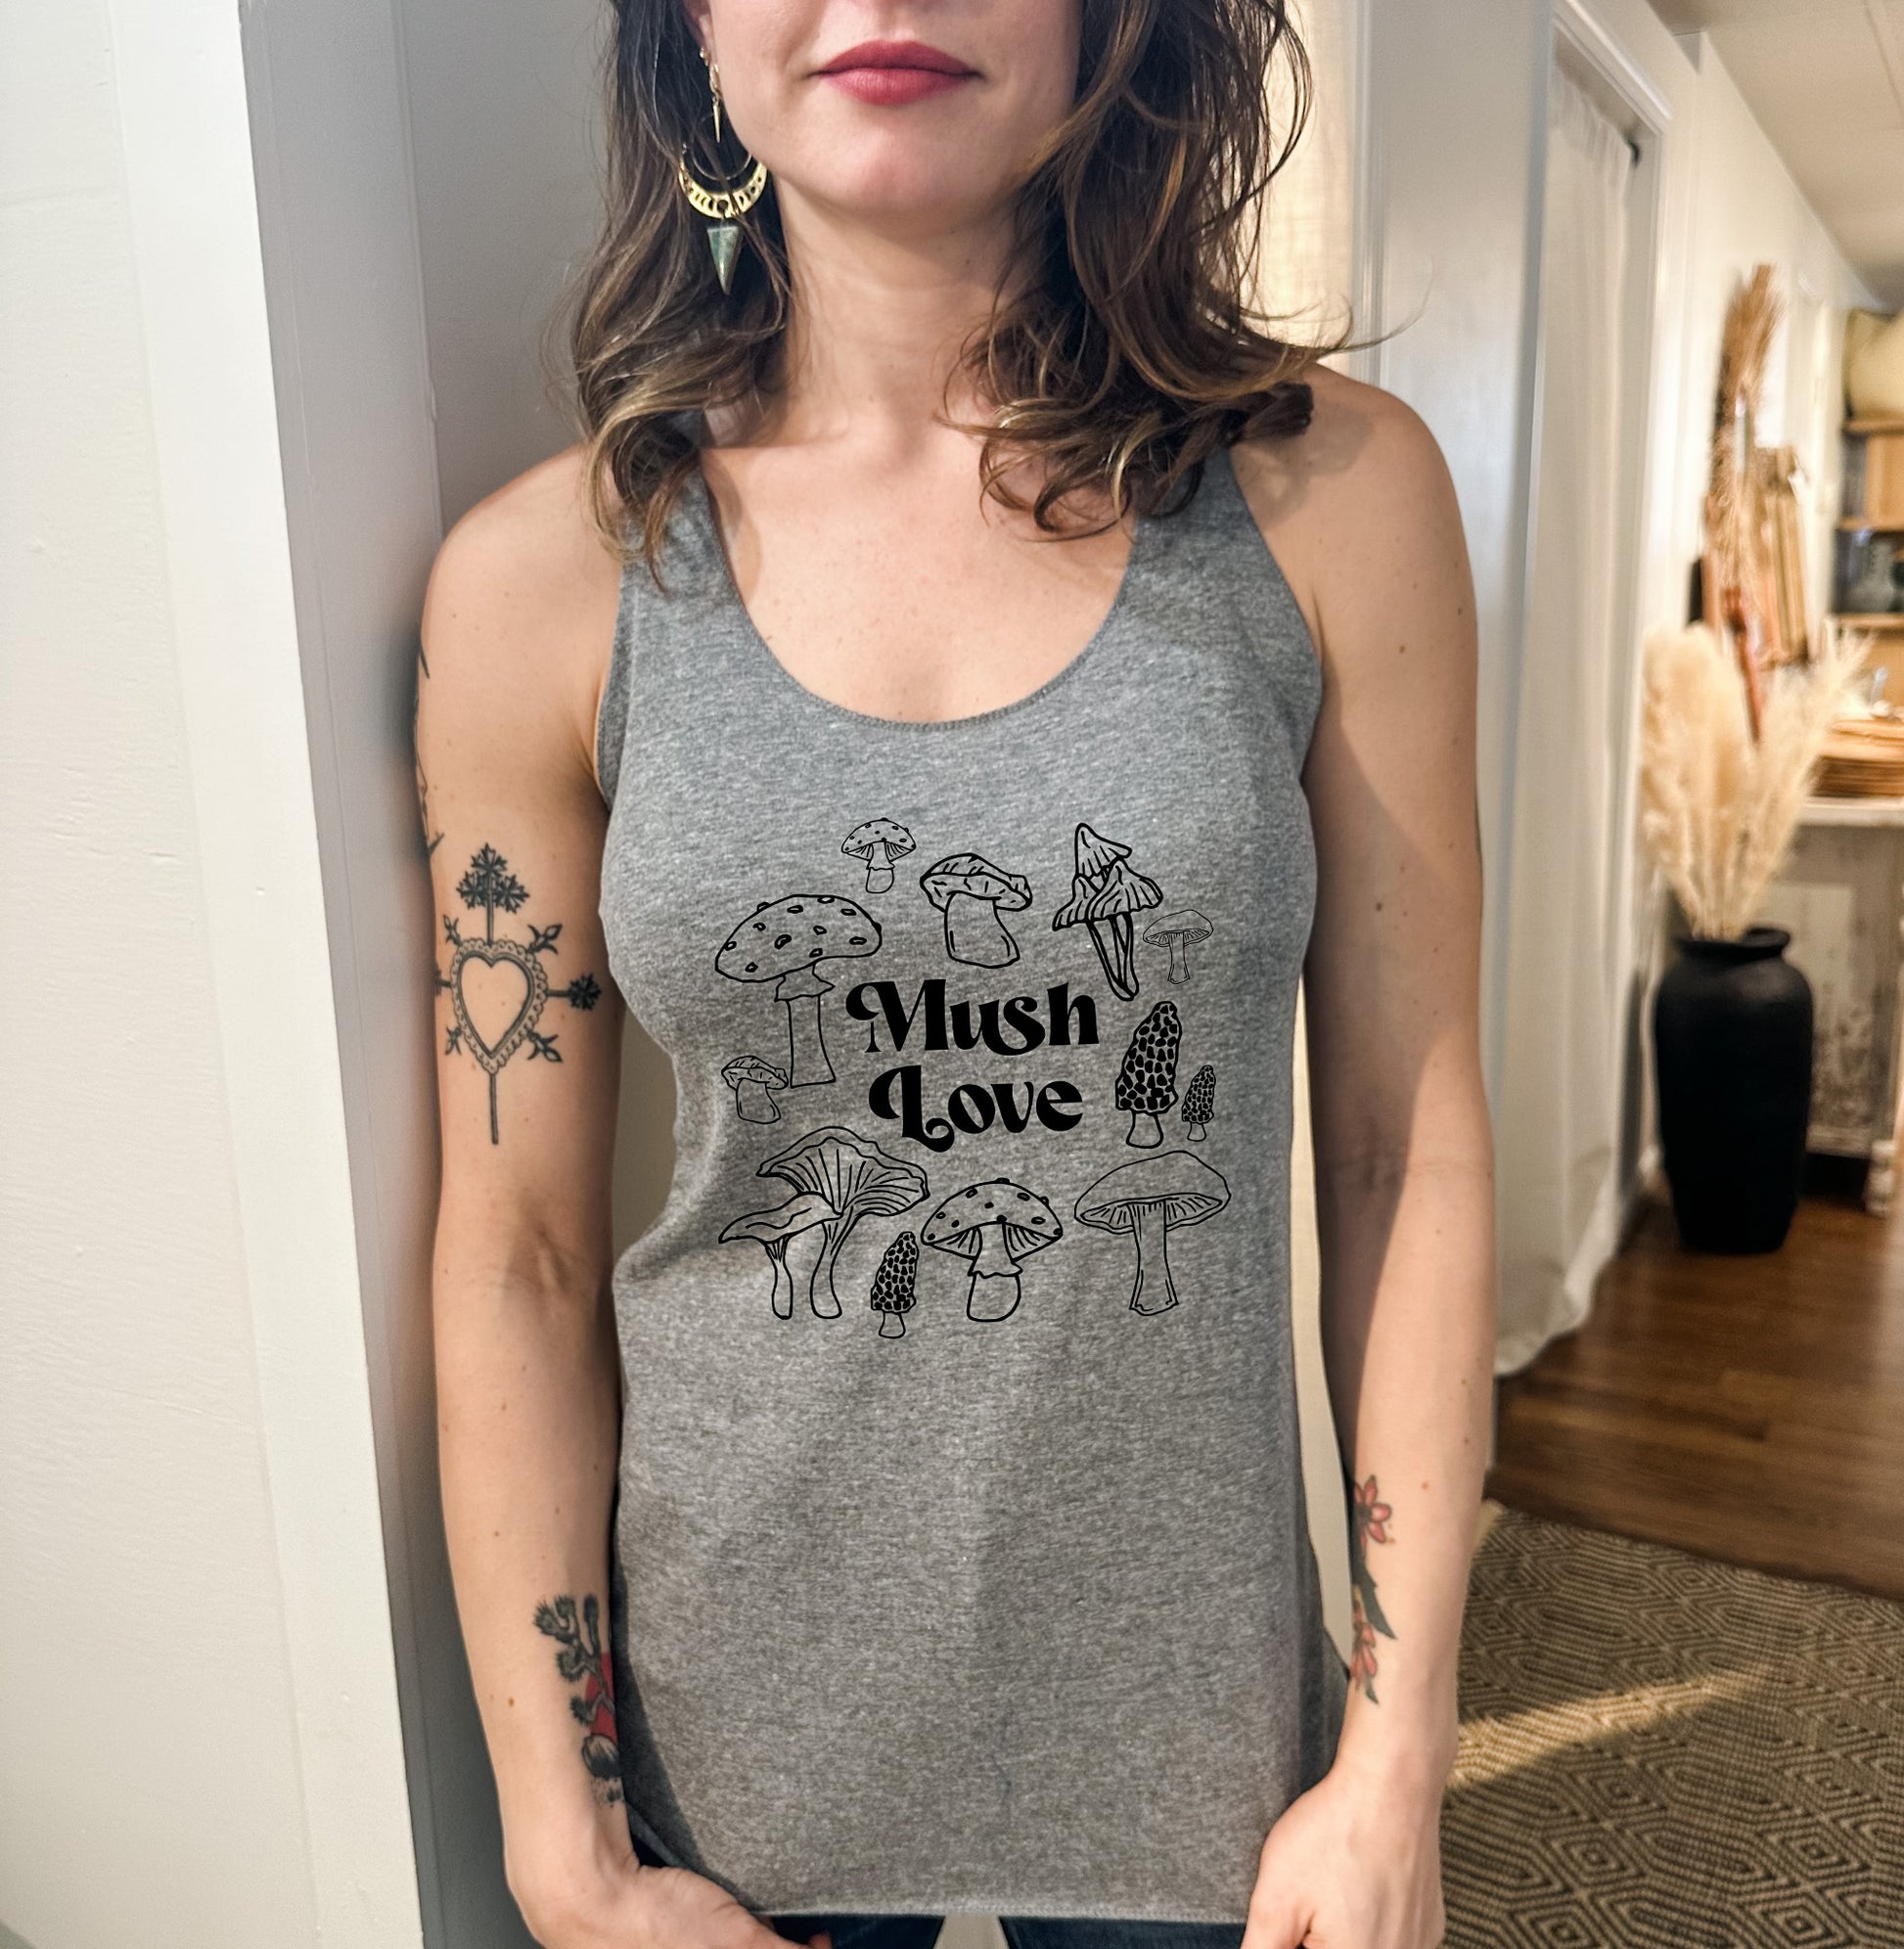 a woman wearing a tank top that says mush love